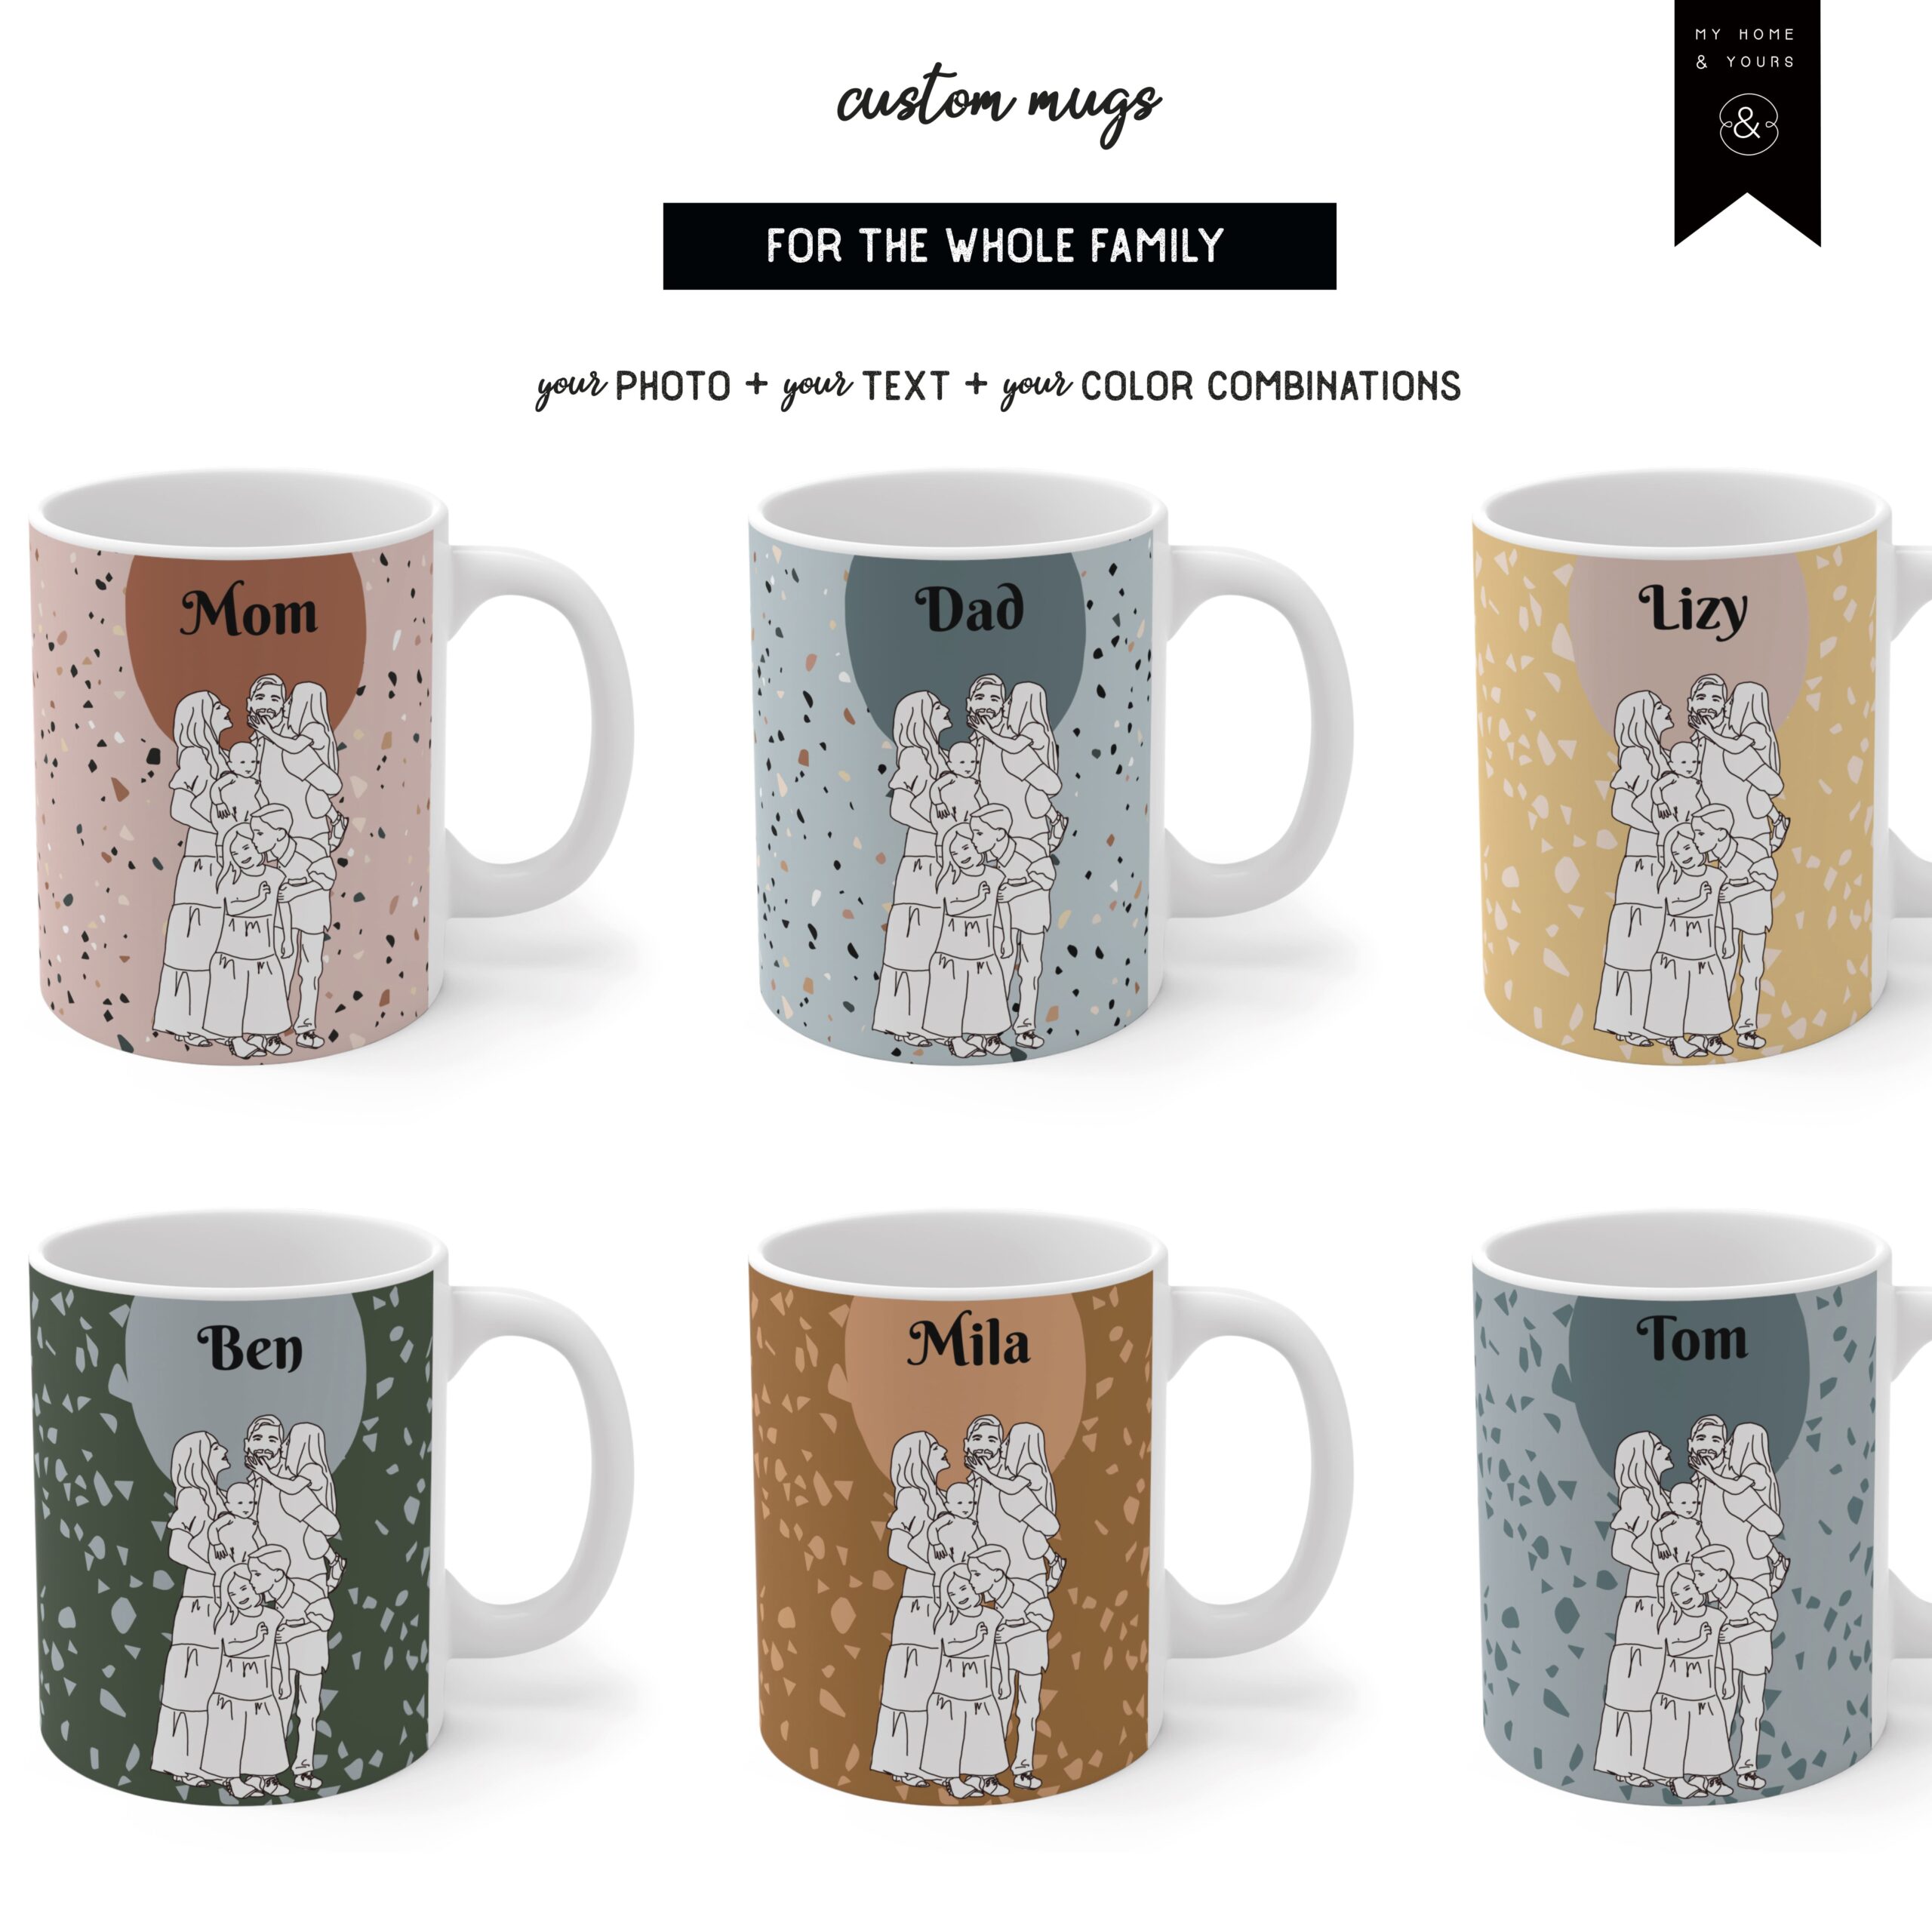 custom family mugs with line art portrait of the whole family on colorful terrazzo patterned ceramic mug premium quality